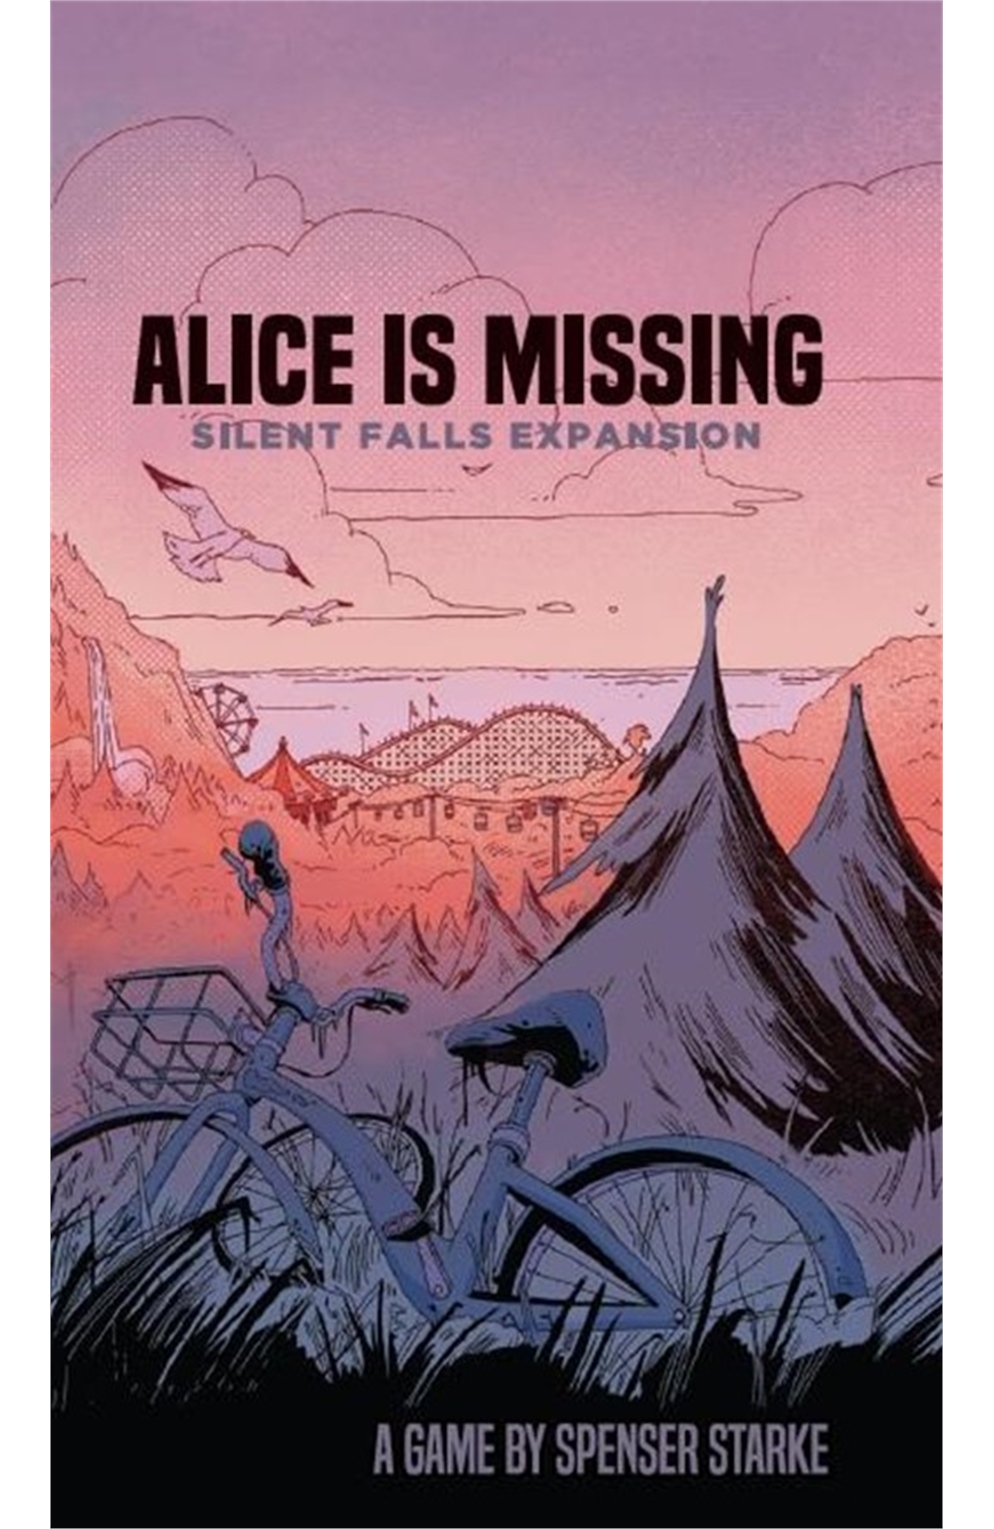 Alice In Missing: Silent Falls Expansion